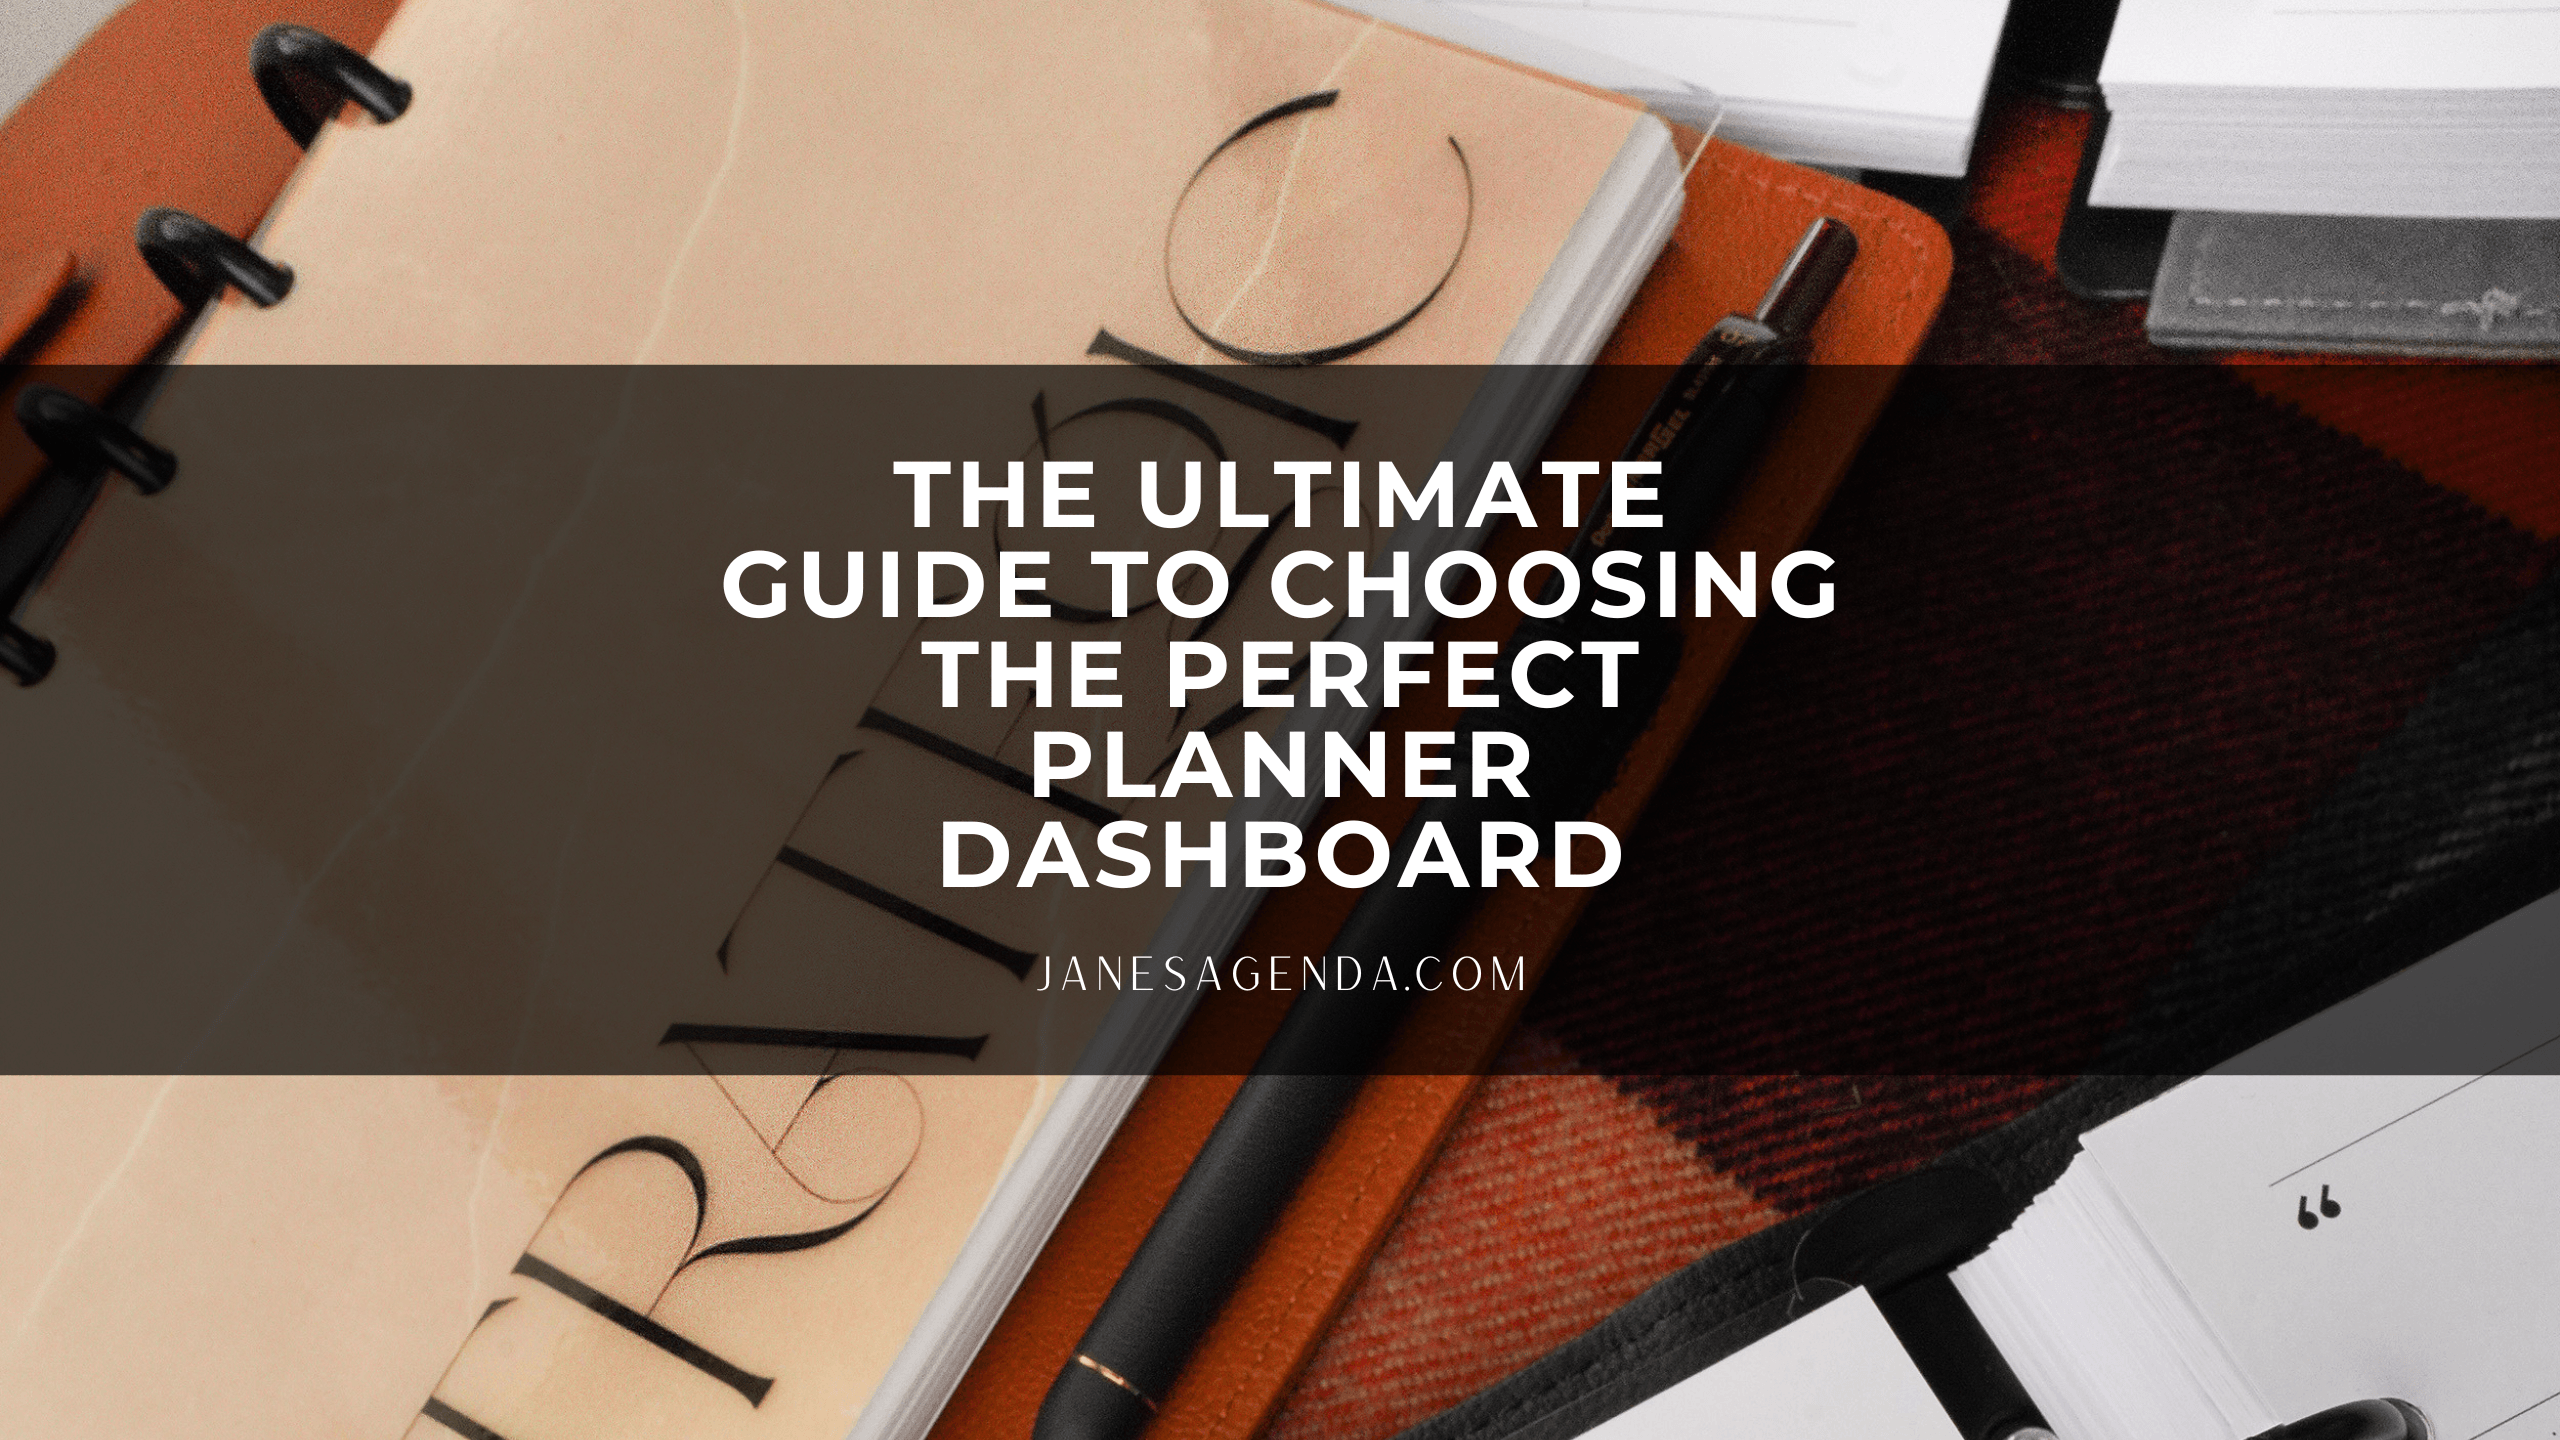 The Ultimate Guide to Choosing and Using the Perfect Dashboard for Your Planner - Jane's Agenda®